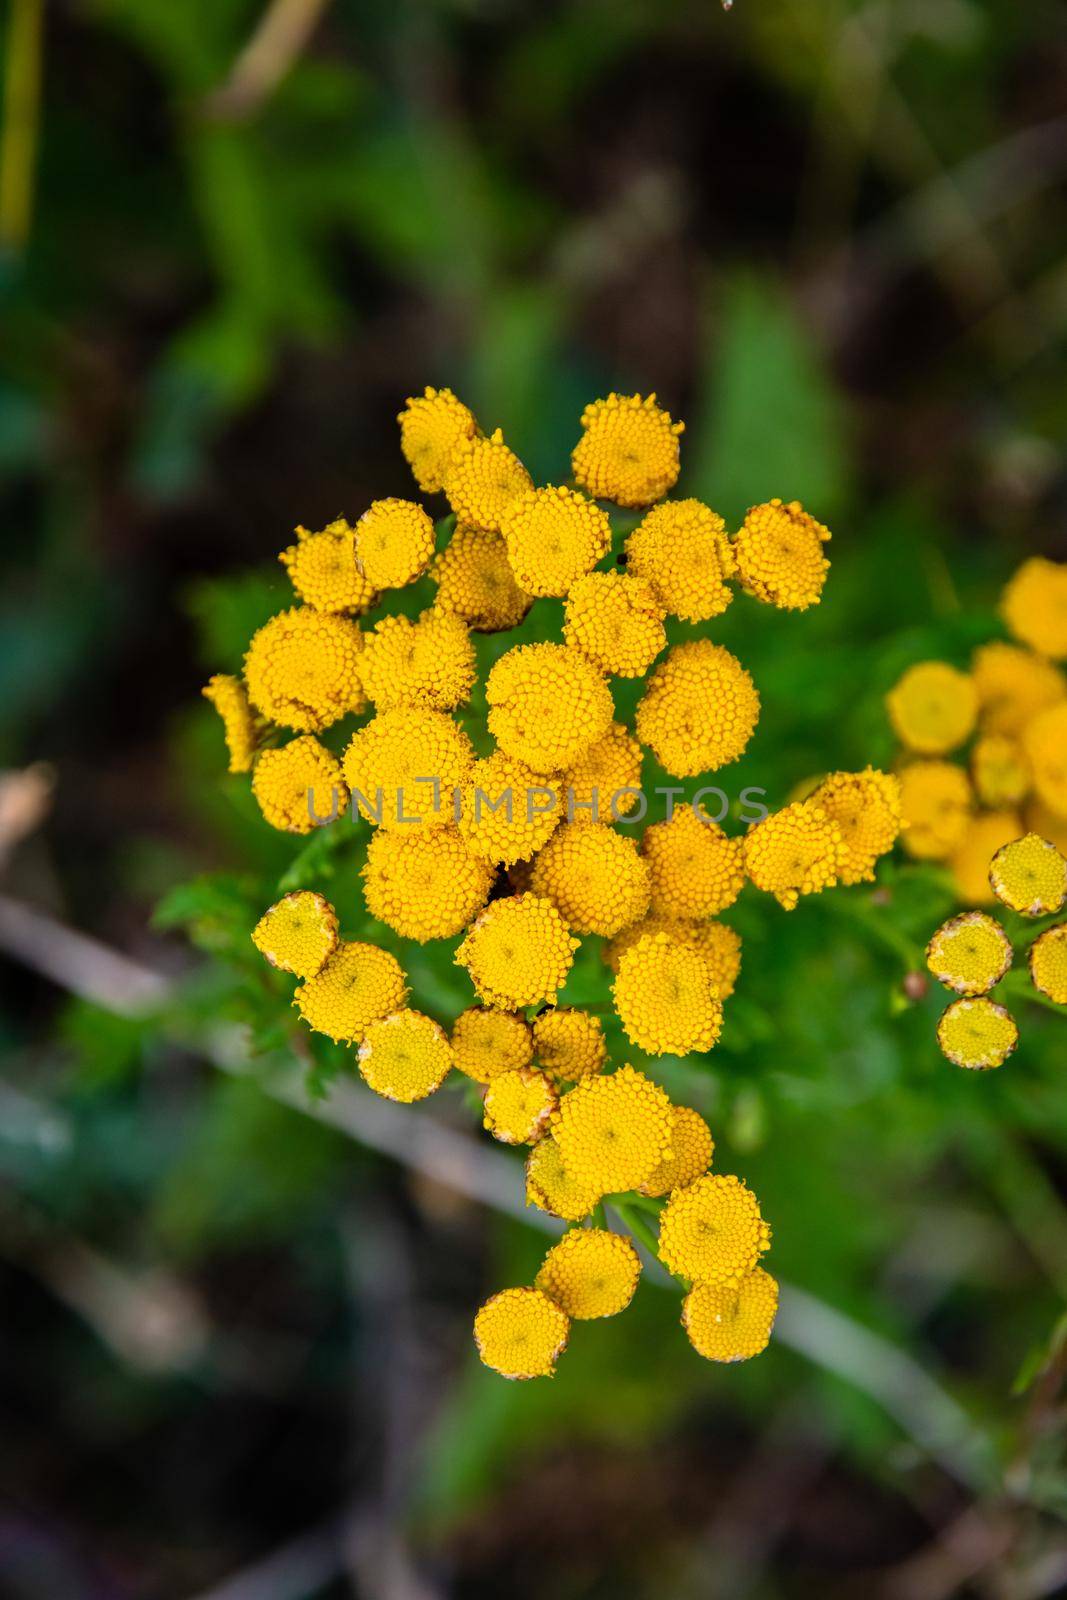 Tansy flower, Tanacetum vulgare, growing on Etna Volcano lava, Sicily by mauricallari